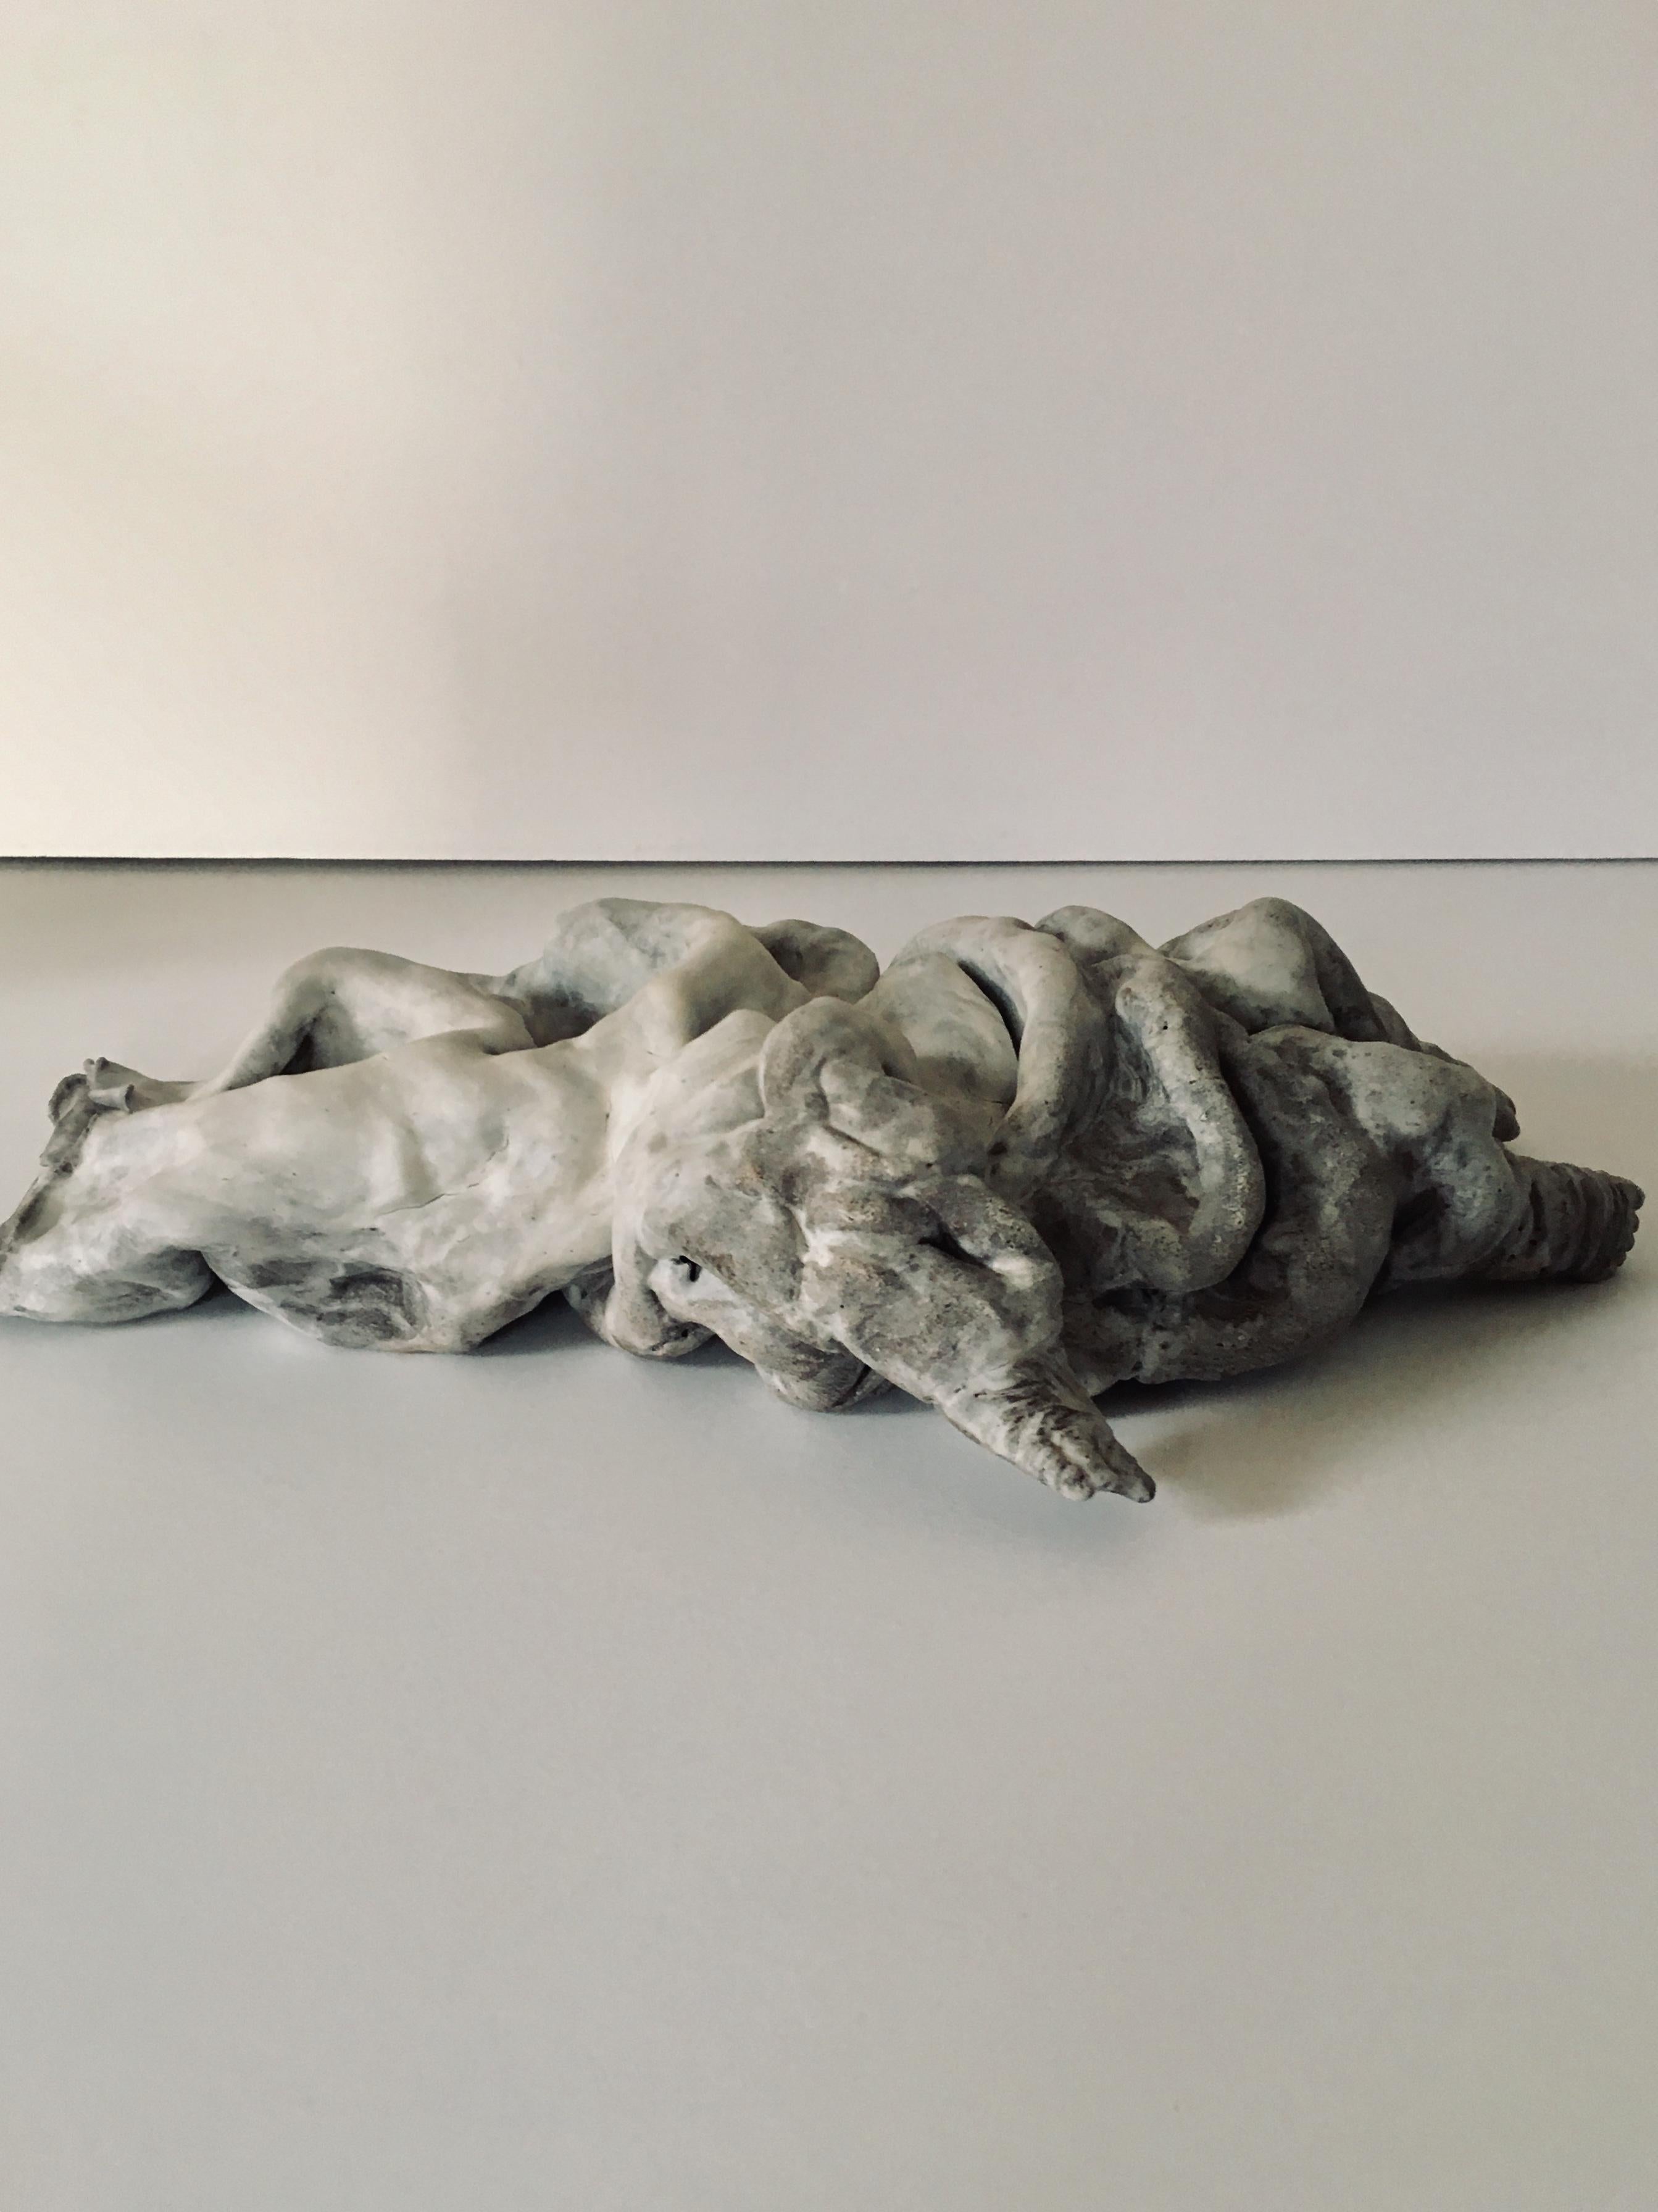 Ceramic figure lying down, sculpture: Figurative 'Wasted' 1